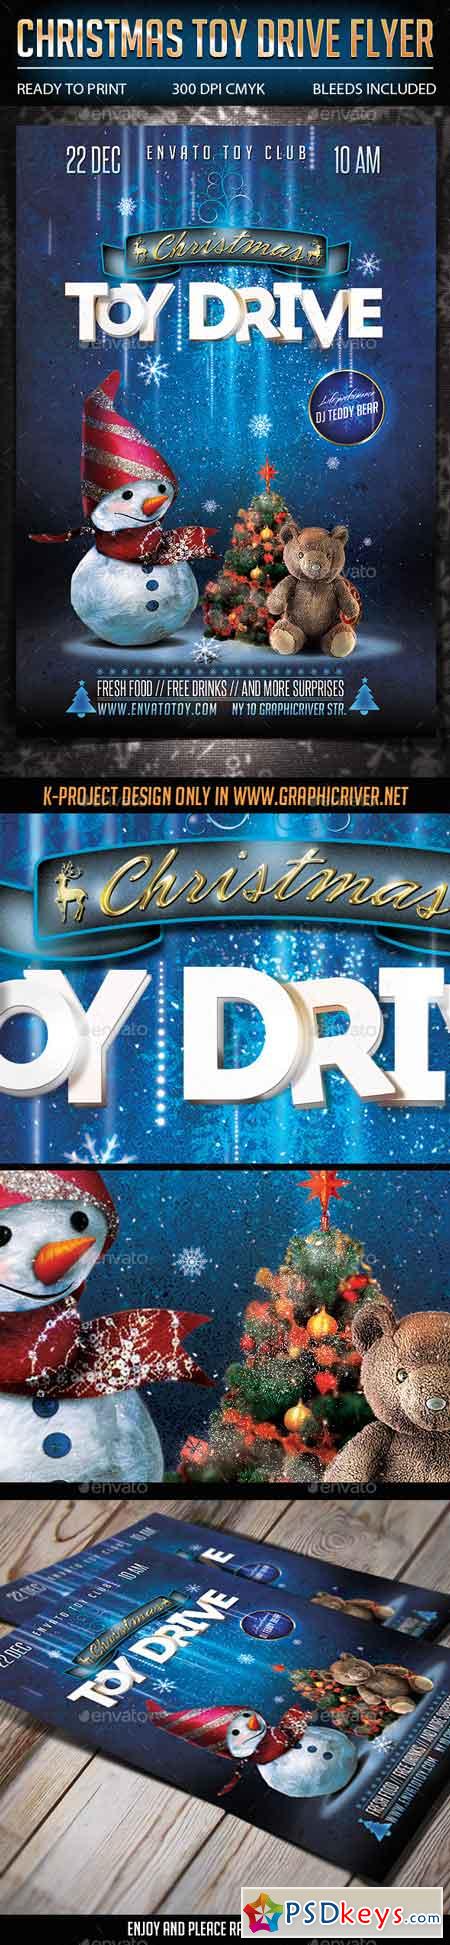 Christmas Toy Drive Flyer 9638179